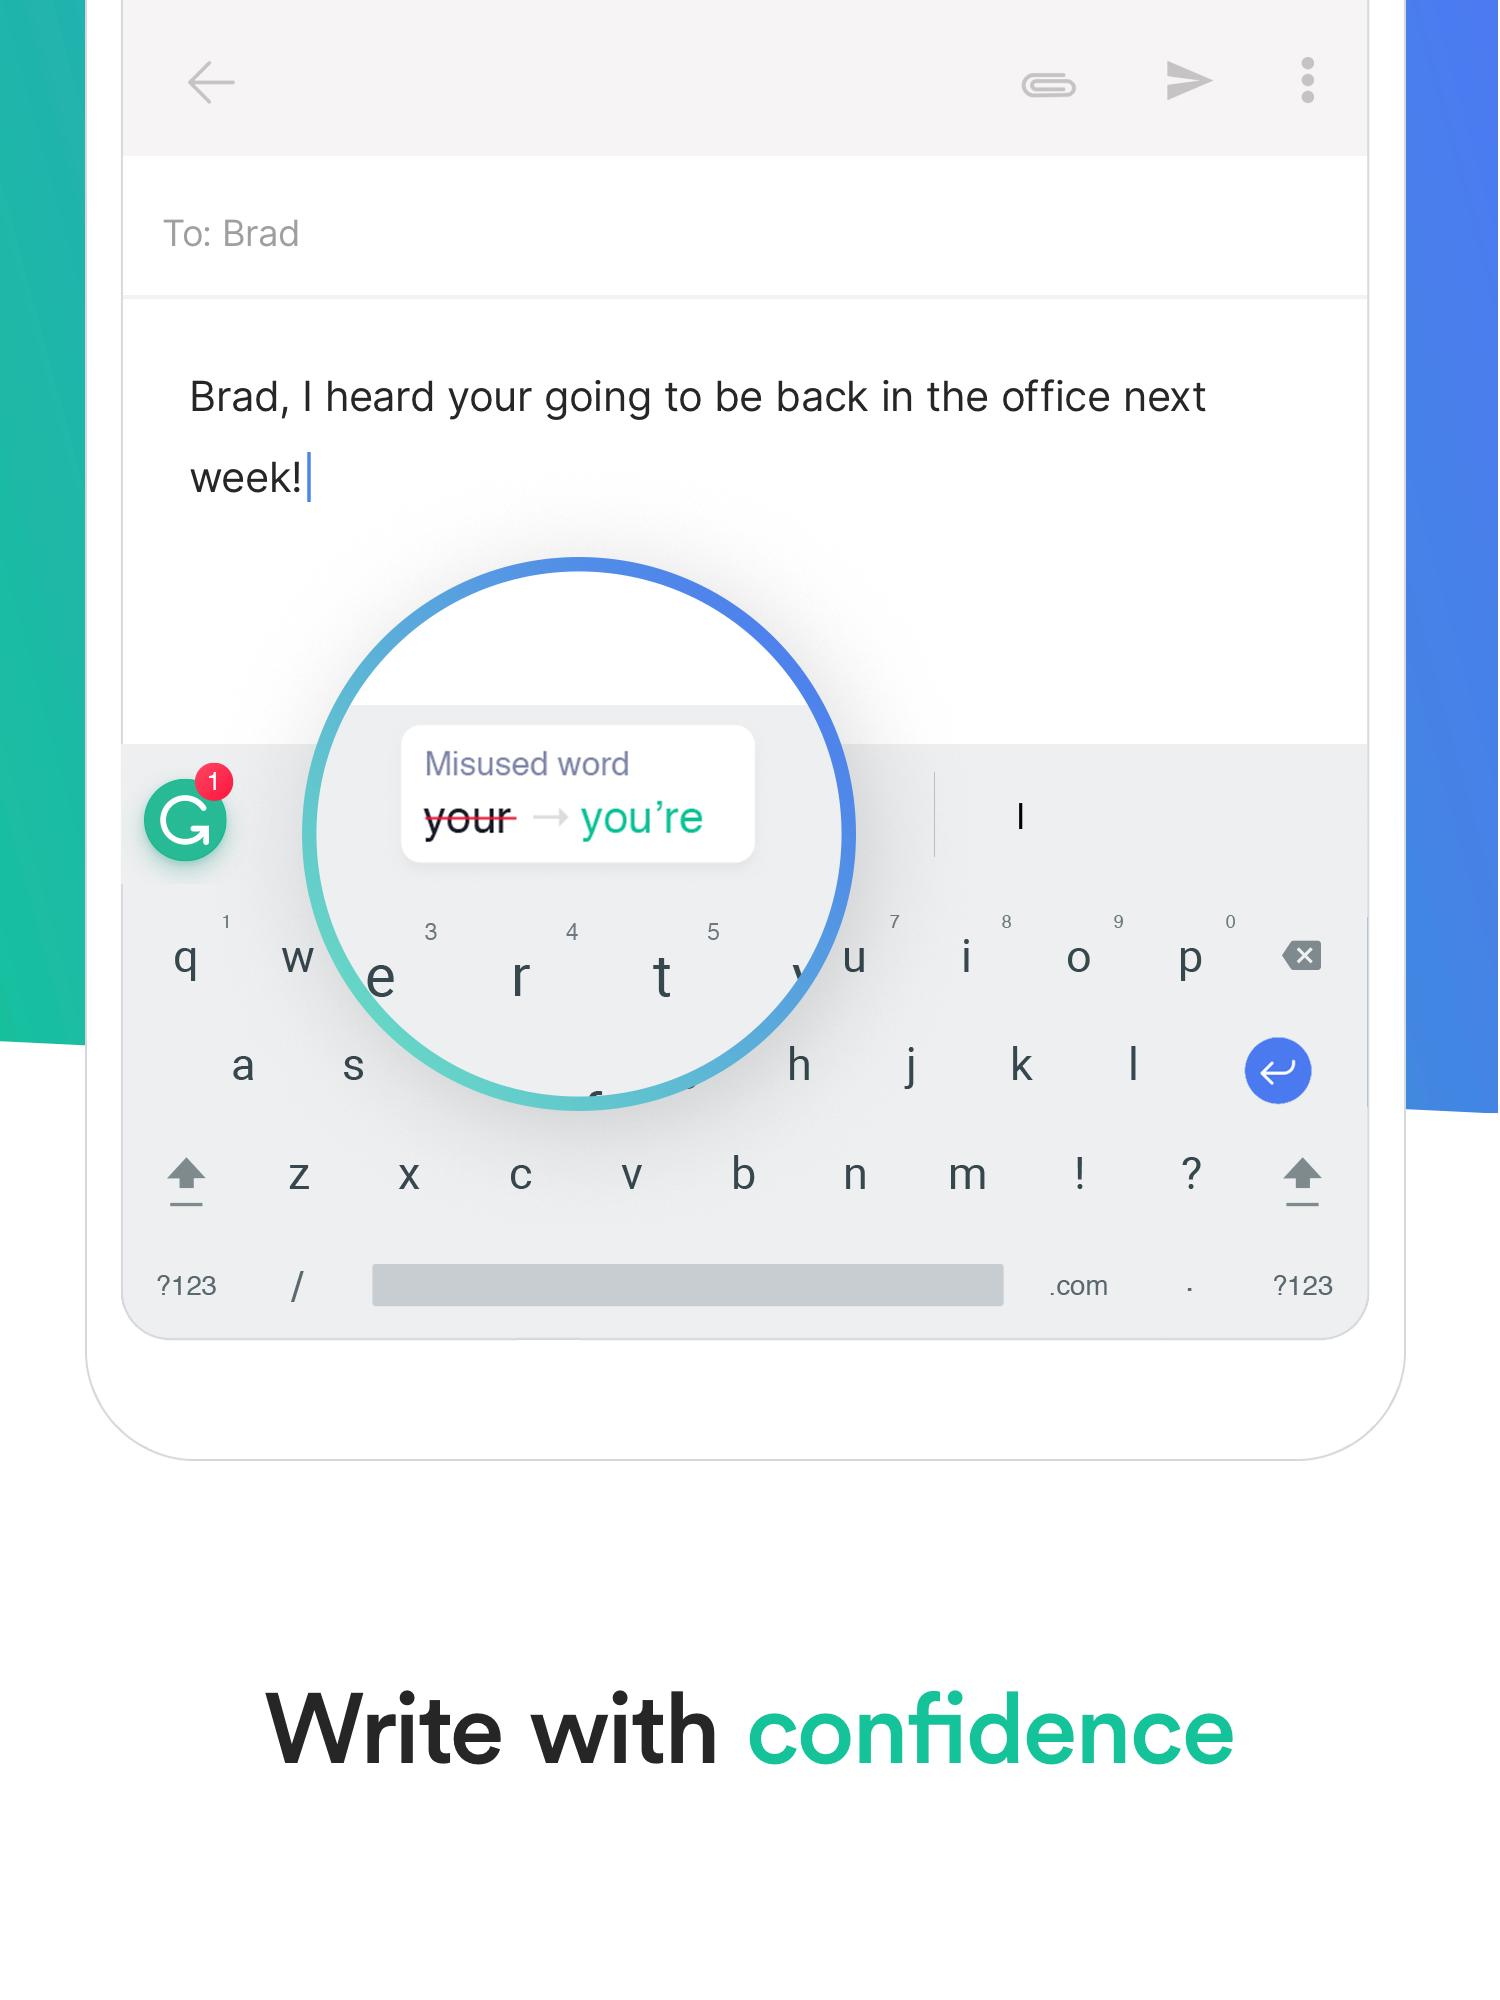 Grammarly Keyboard — Type with confidence 1.4.0.7 Screenshot 13